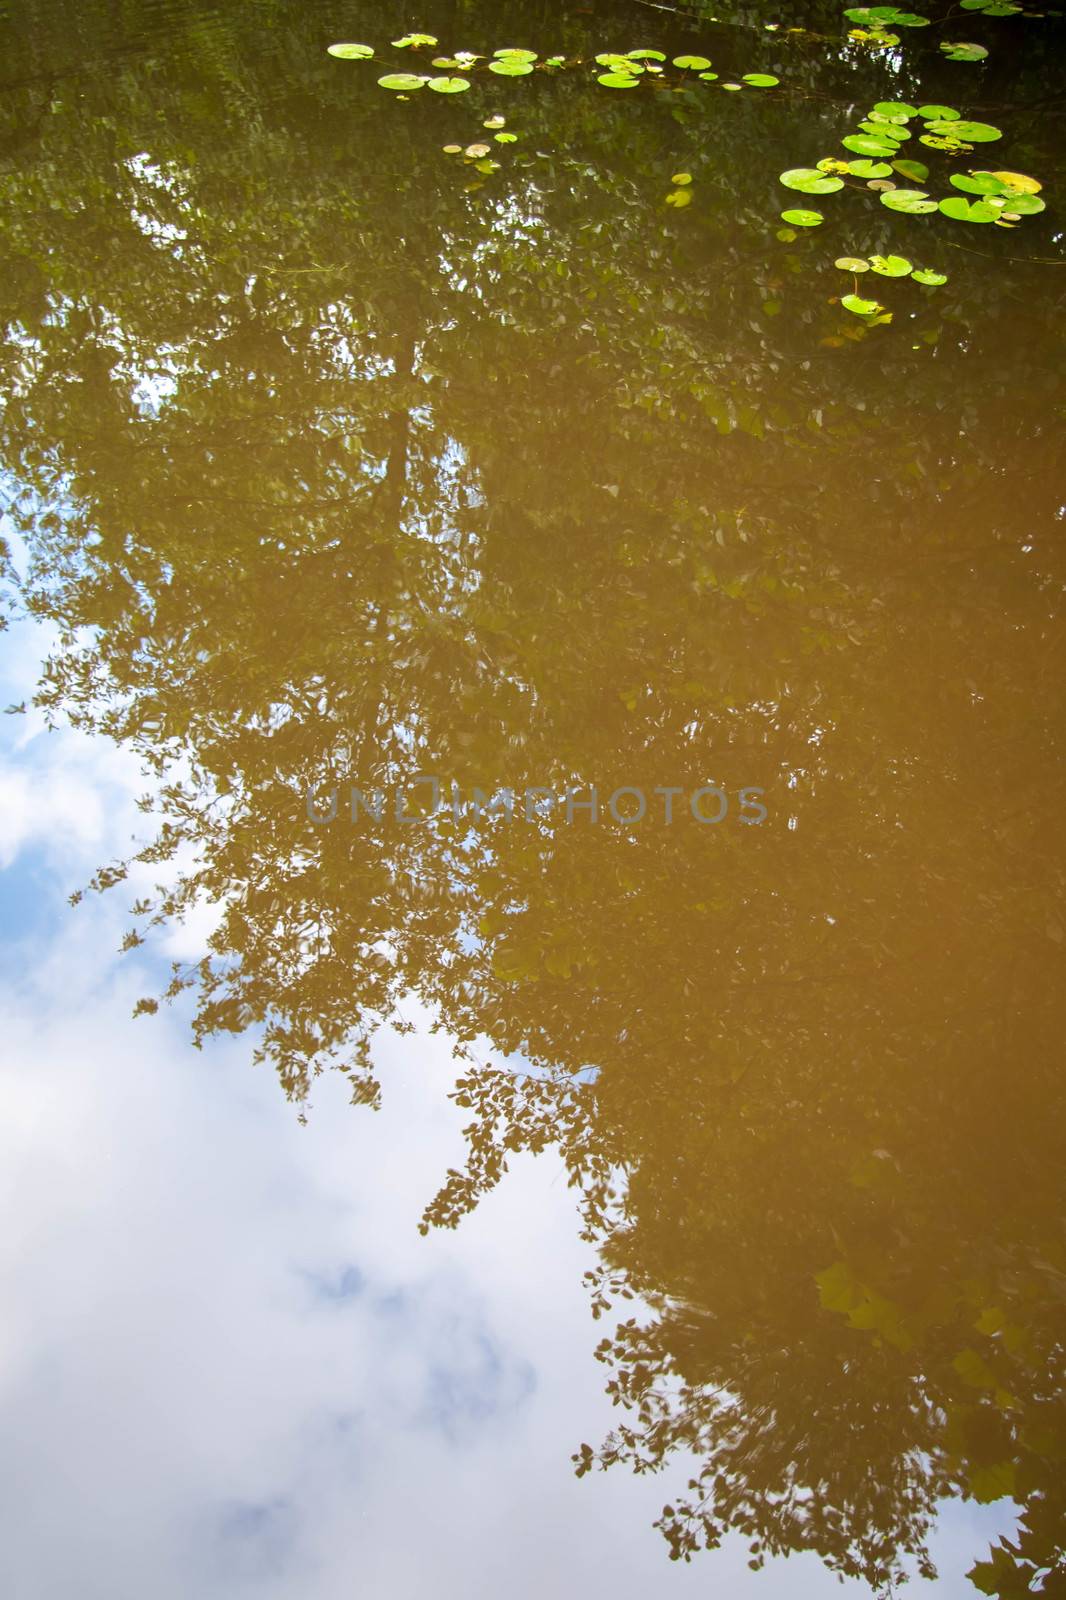 Surreal abstract close up of forest reflection in pond. Lily pads float on the surface. Blue sky and leaves visible in water.